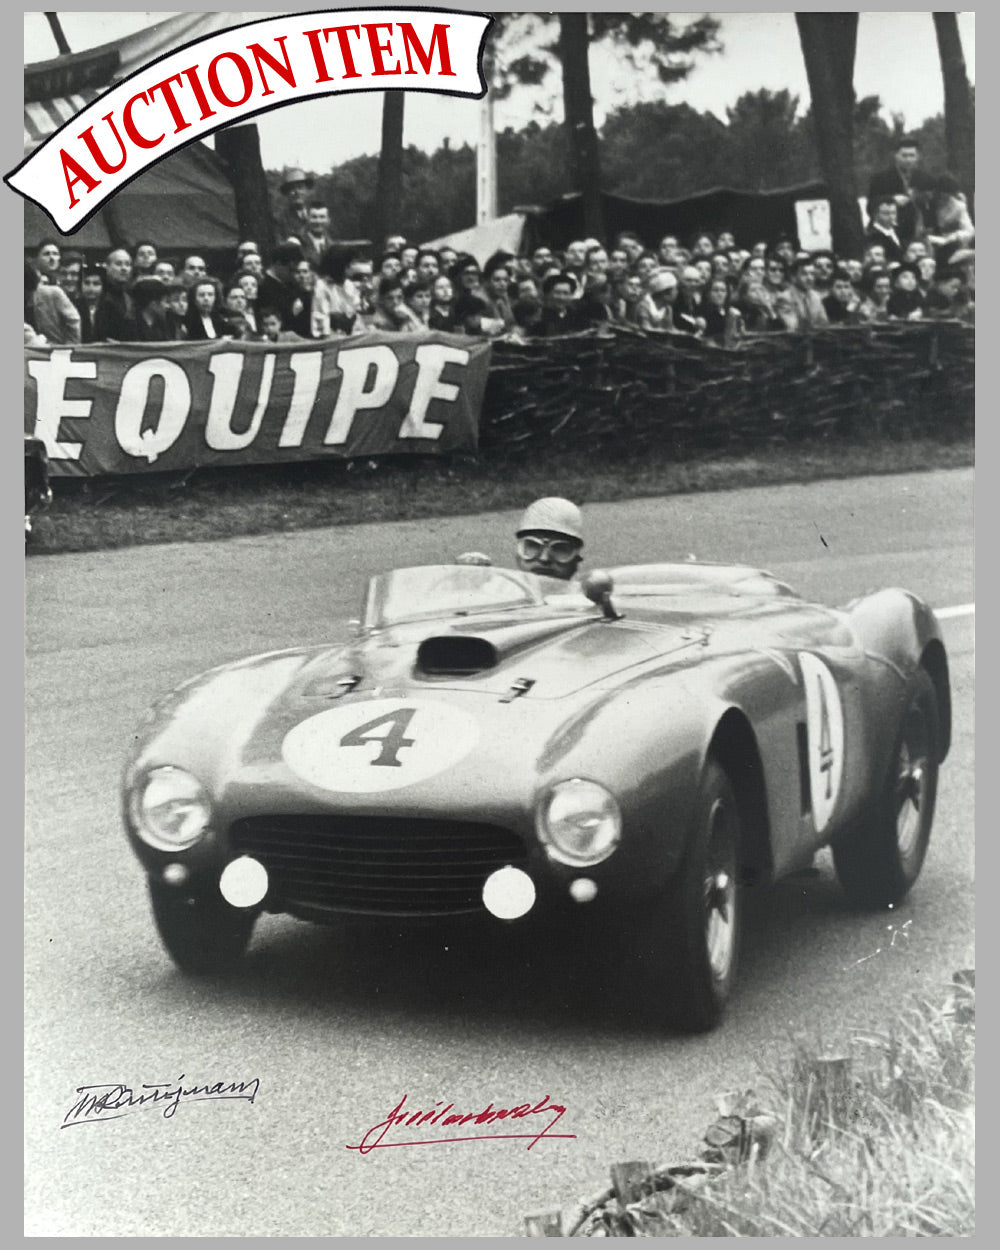 24 Hours of le Mans 1954 b&w photograph, autographed by Gonzalez and Trintignant